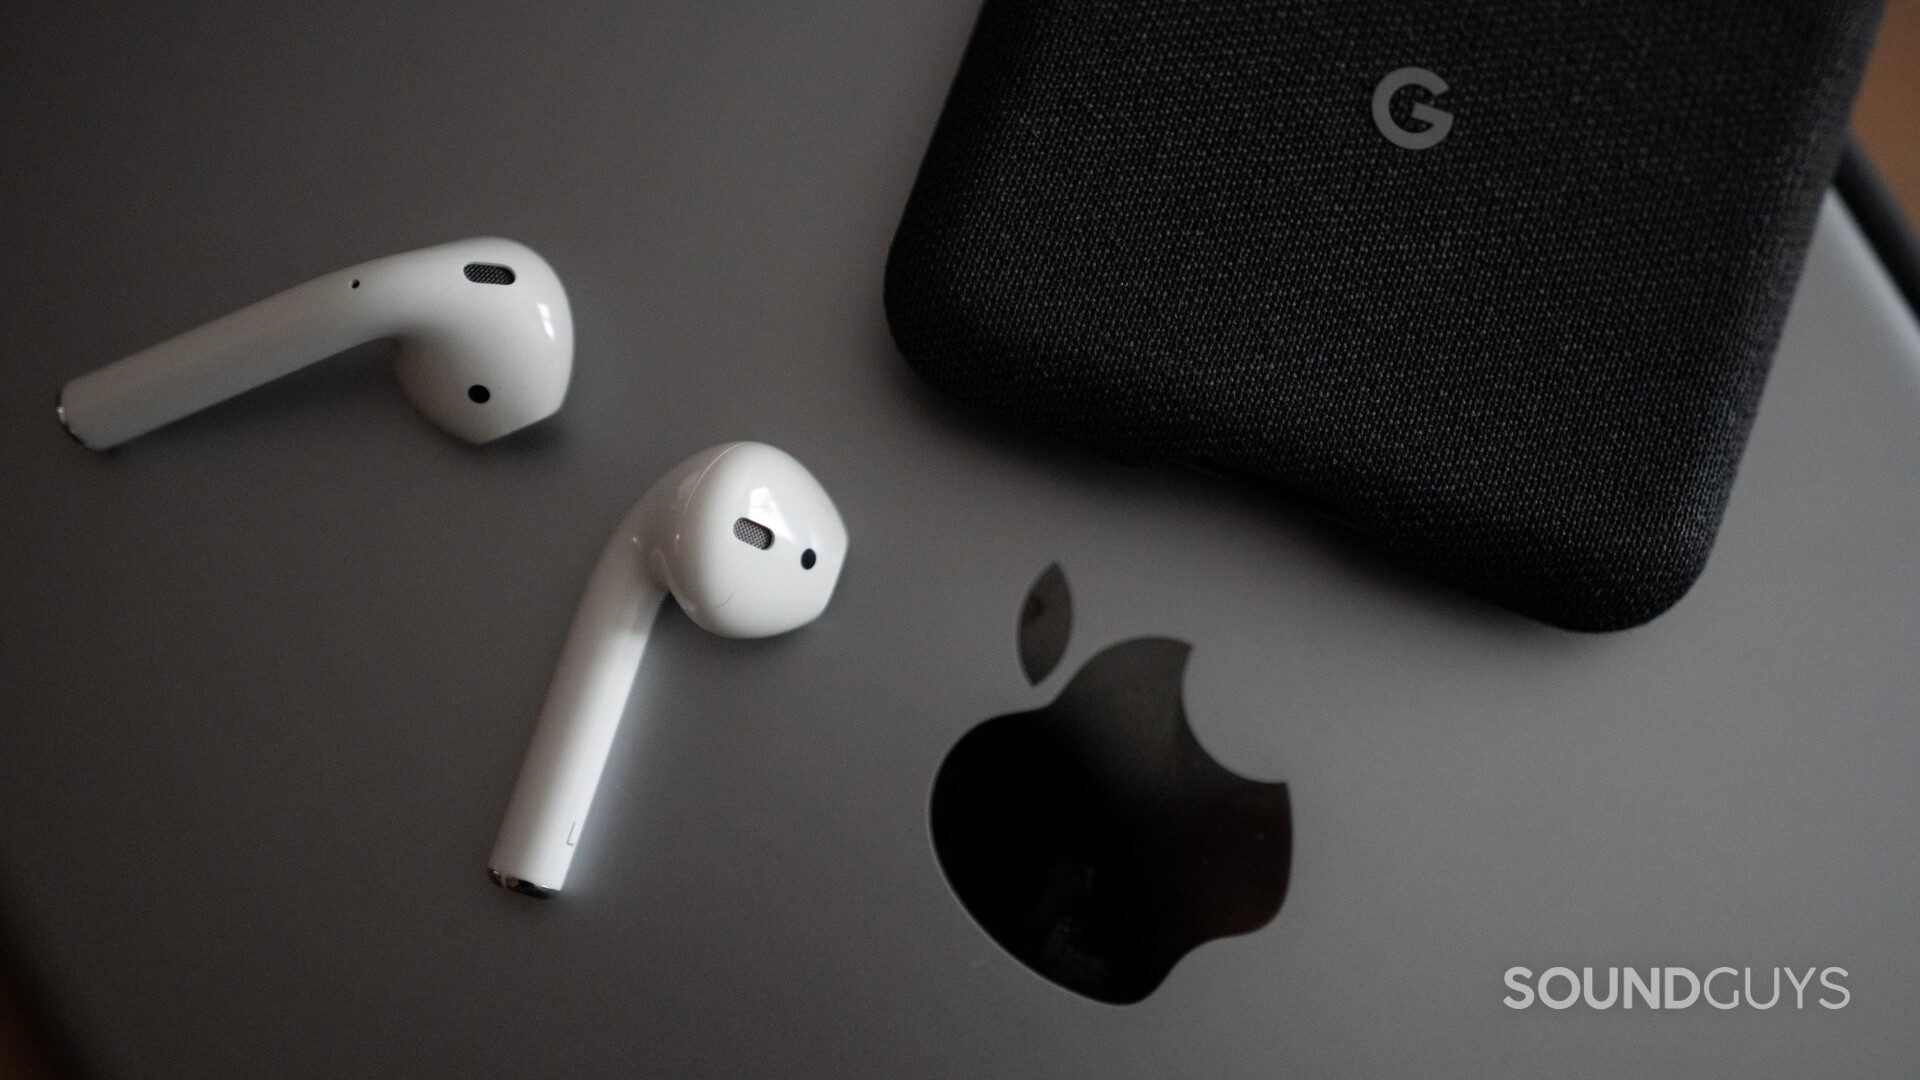 How to connect AirPods: iPhone, iPad, Mac, and more - SoundGuys